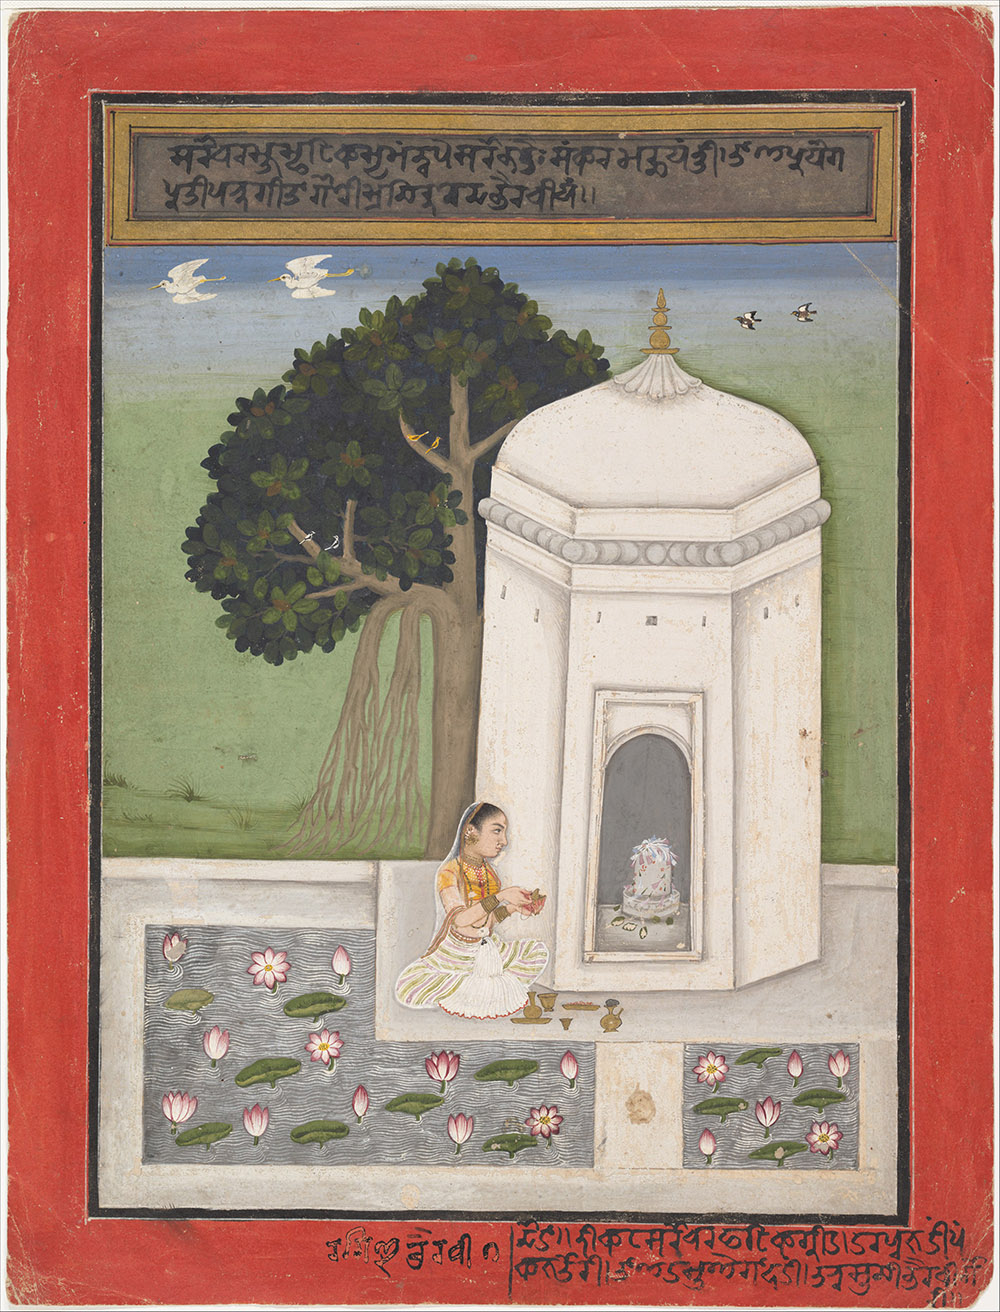 Early Master at the Mandi Court Bhairavi Ragini: Folio from a Ragamala Series, ca. 1640–50 India (Mandi, Himachal Pradesh), Opaque watercolor, silver, gold and ink on paper; Page: 10 9/16 x 8 1/16 in. (26.8 x 20.5 cm) Image: 9 x 6 1/2 in. (22.9 x 16.5 cm) The Metropolitan Museum of Art, New York, Rogers Fund, 1958 (58.1.1) http://www.metmuseum.org/Collections/search-the-collections/37857